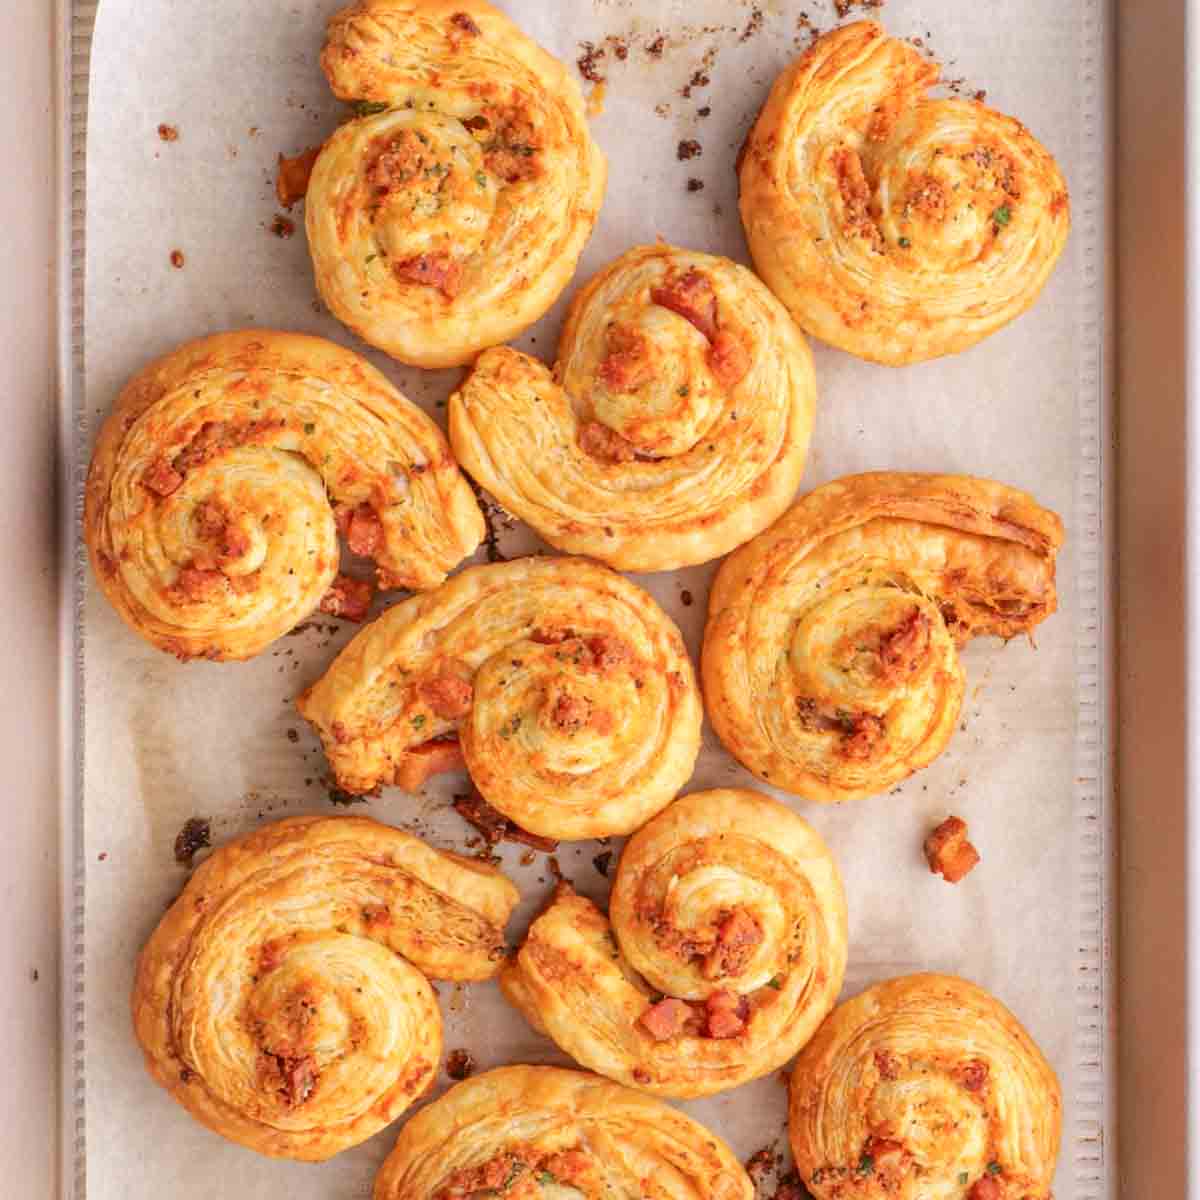 A baking sheet with a tray of pastries on it.